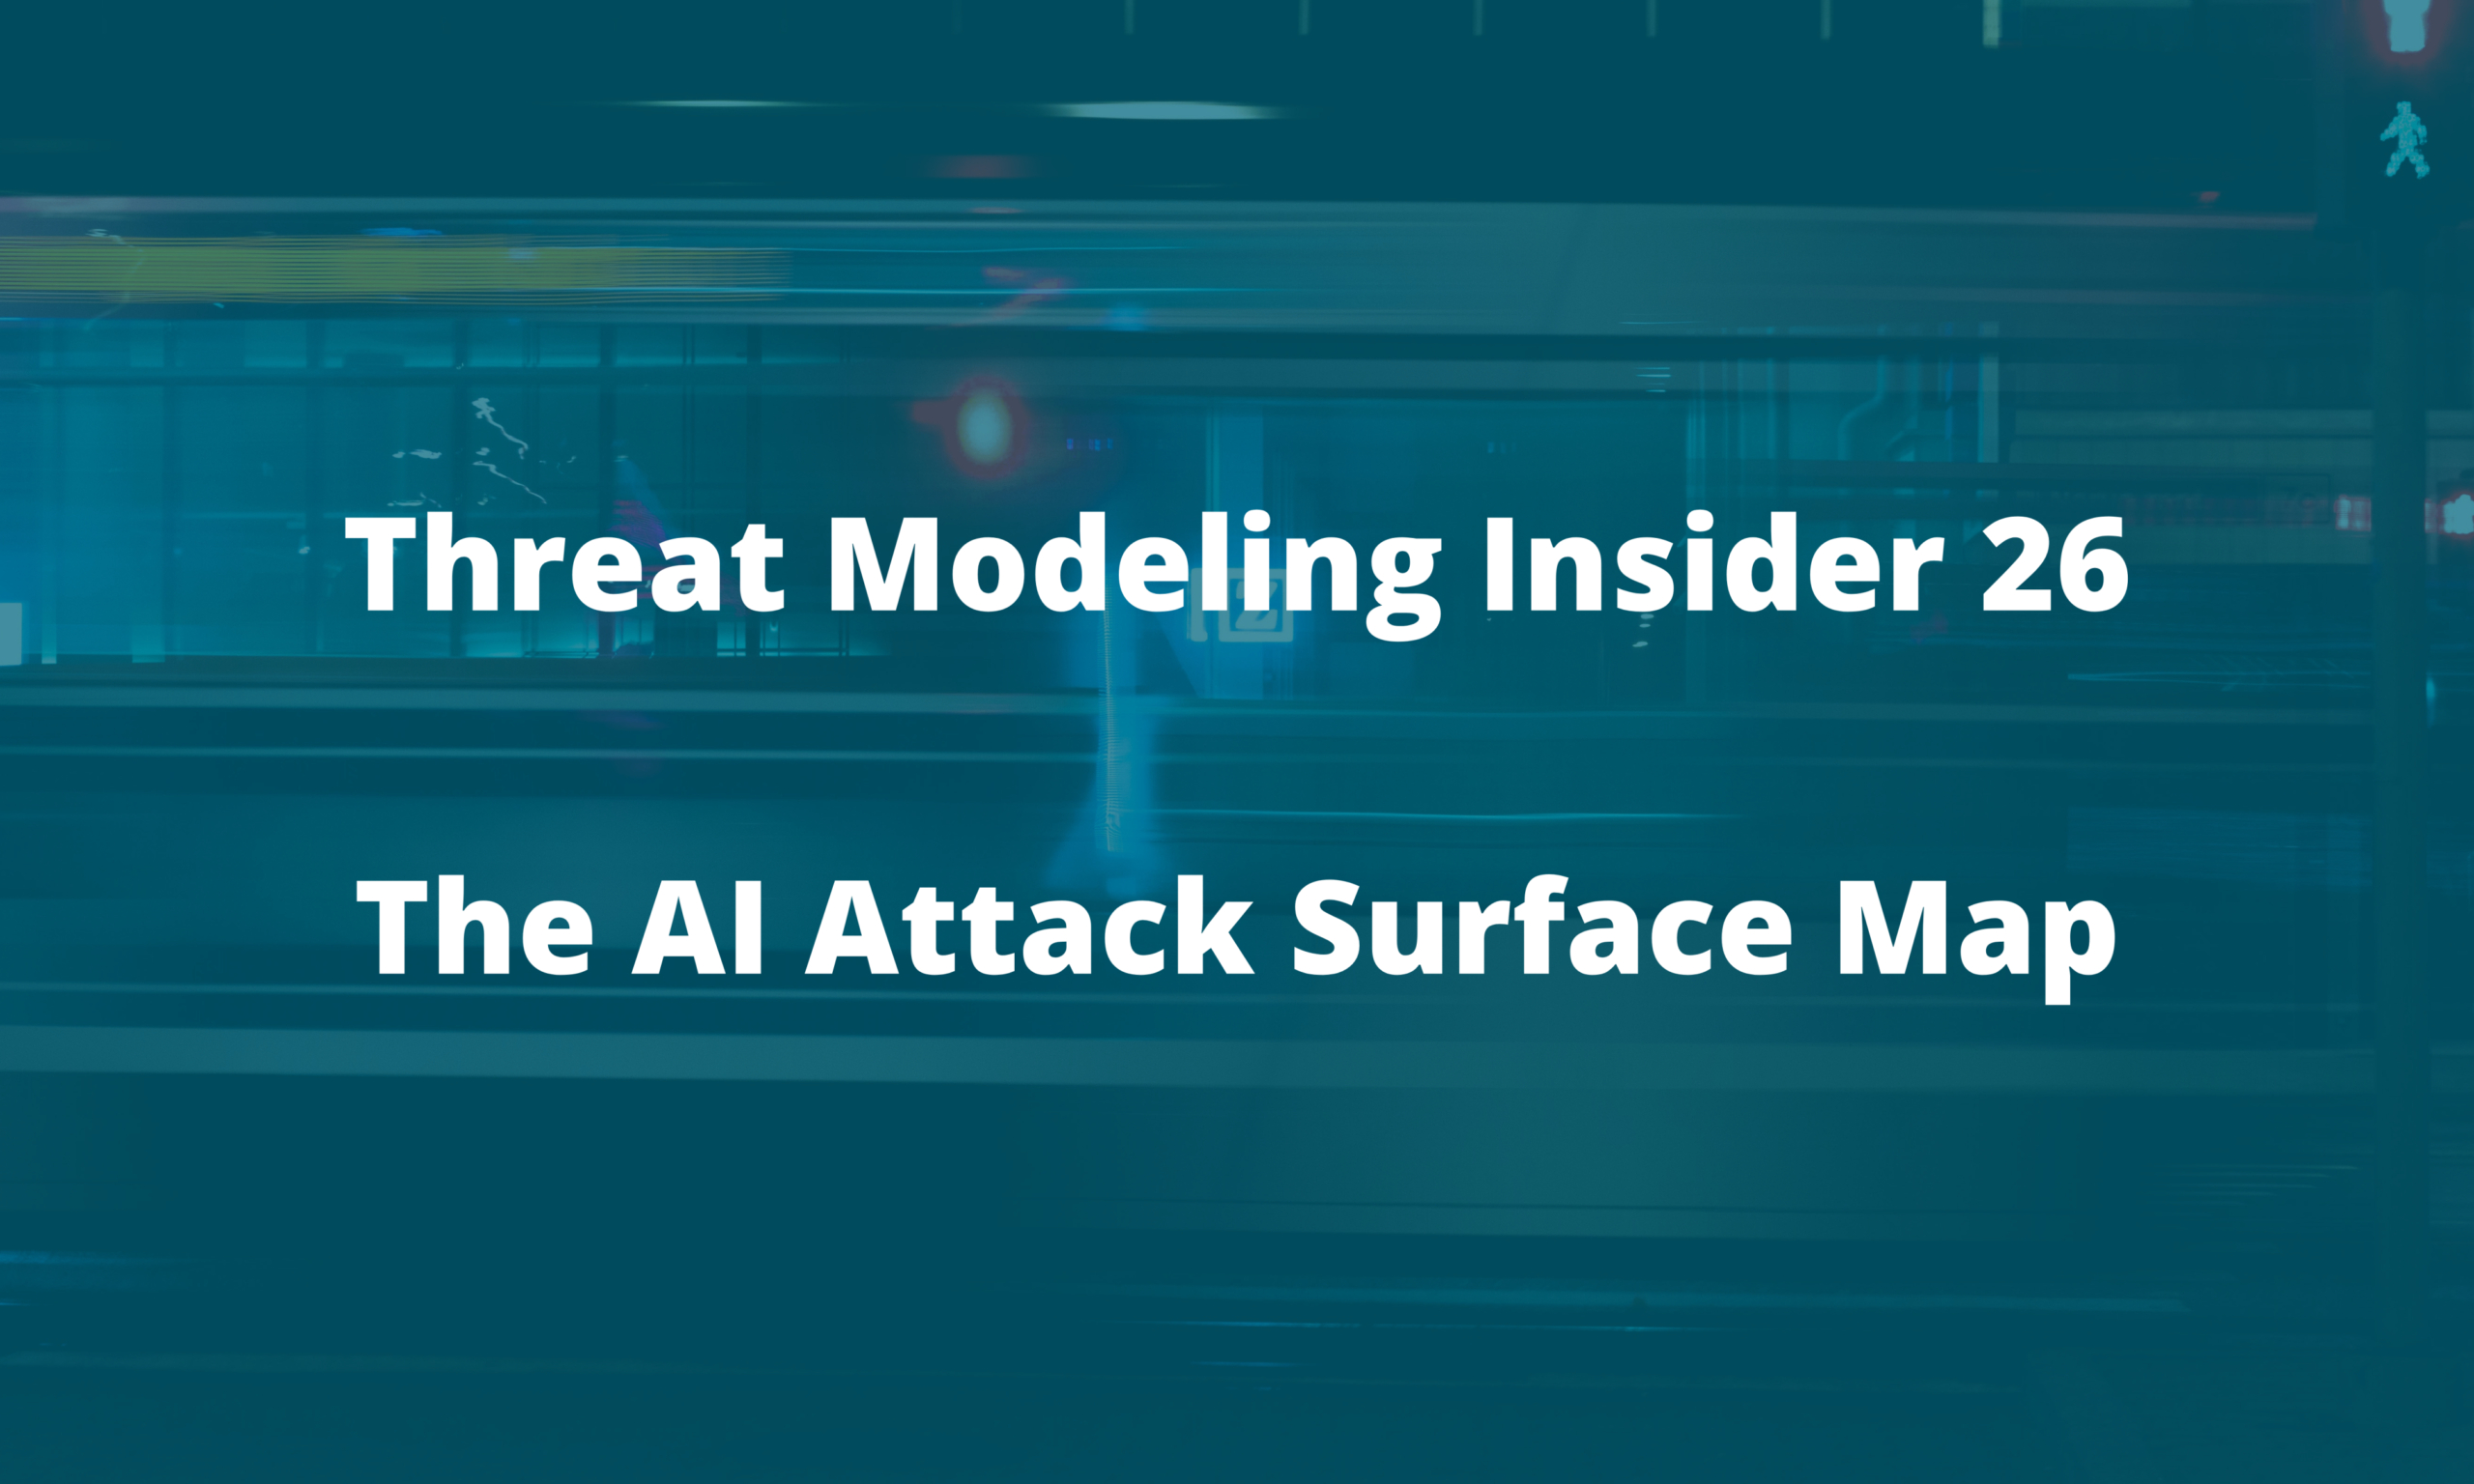 TMI newsletter 26 – The AI Attack Surface Map